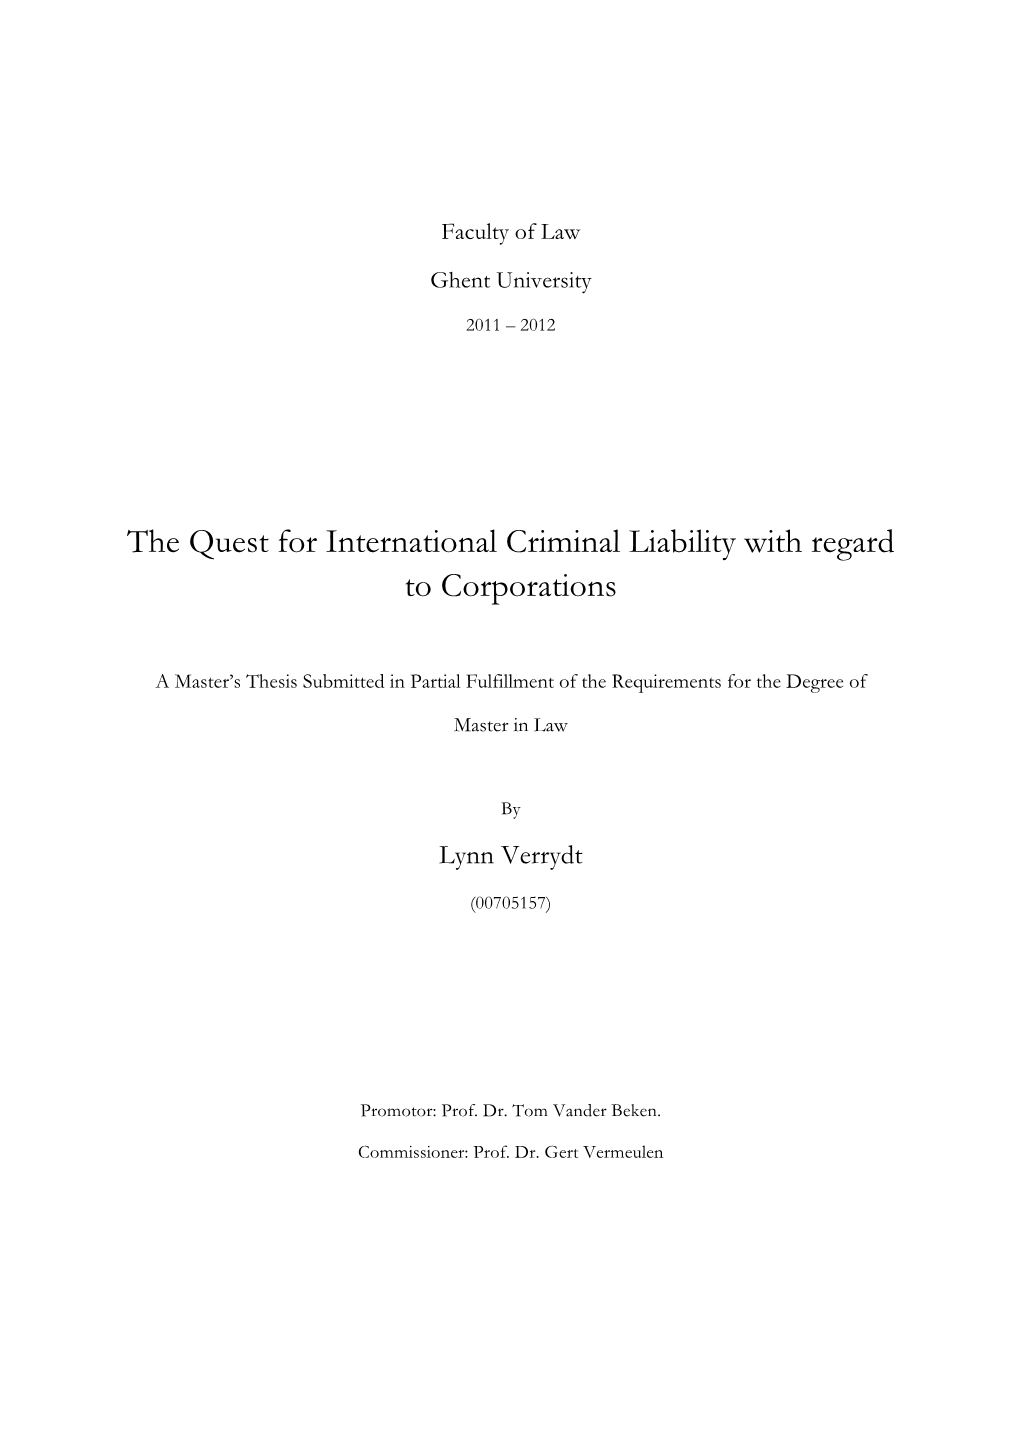 The Quest for International Criminal Liability with Regard to Corporations